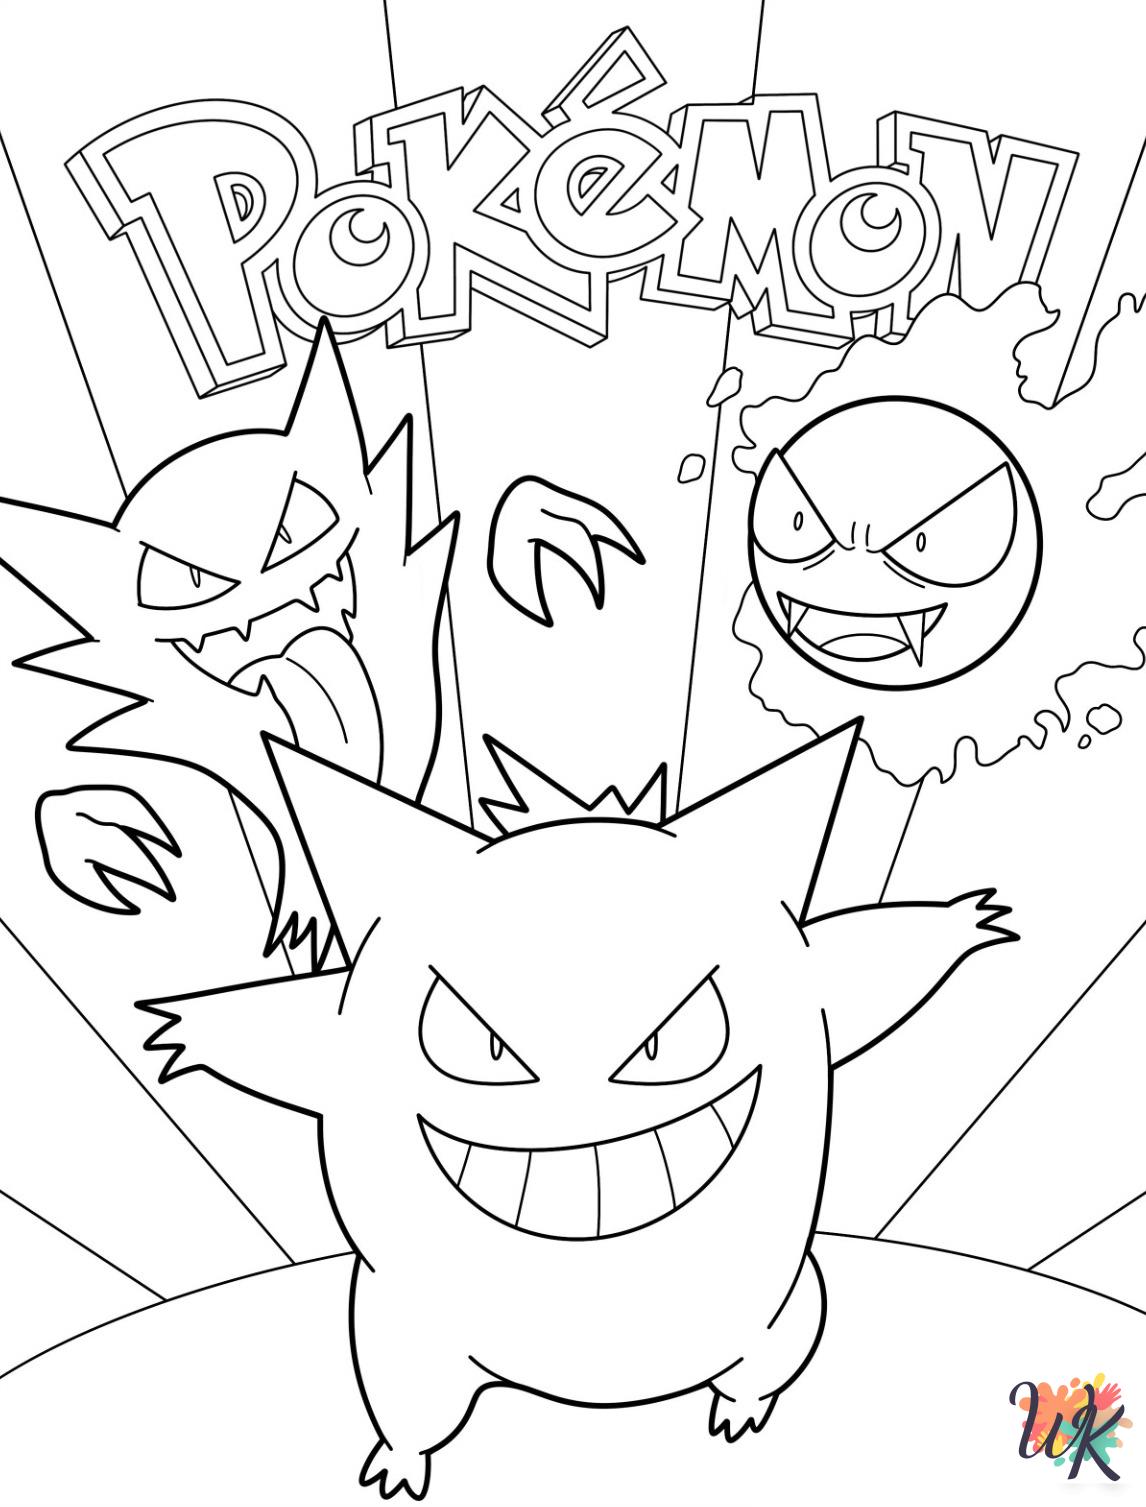 Gengar ornaments coloring pages